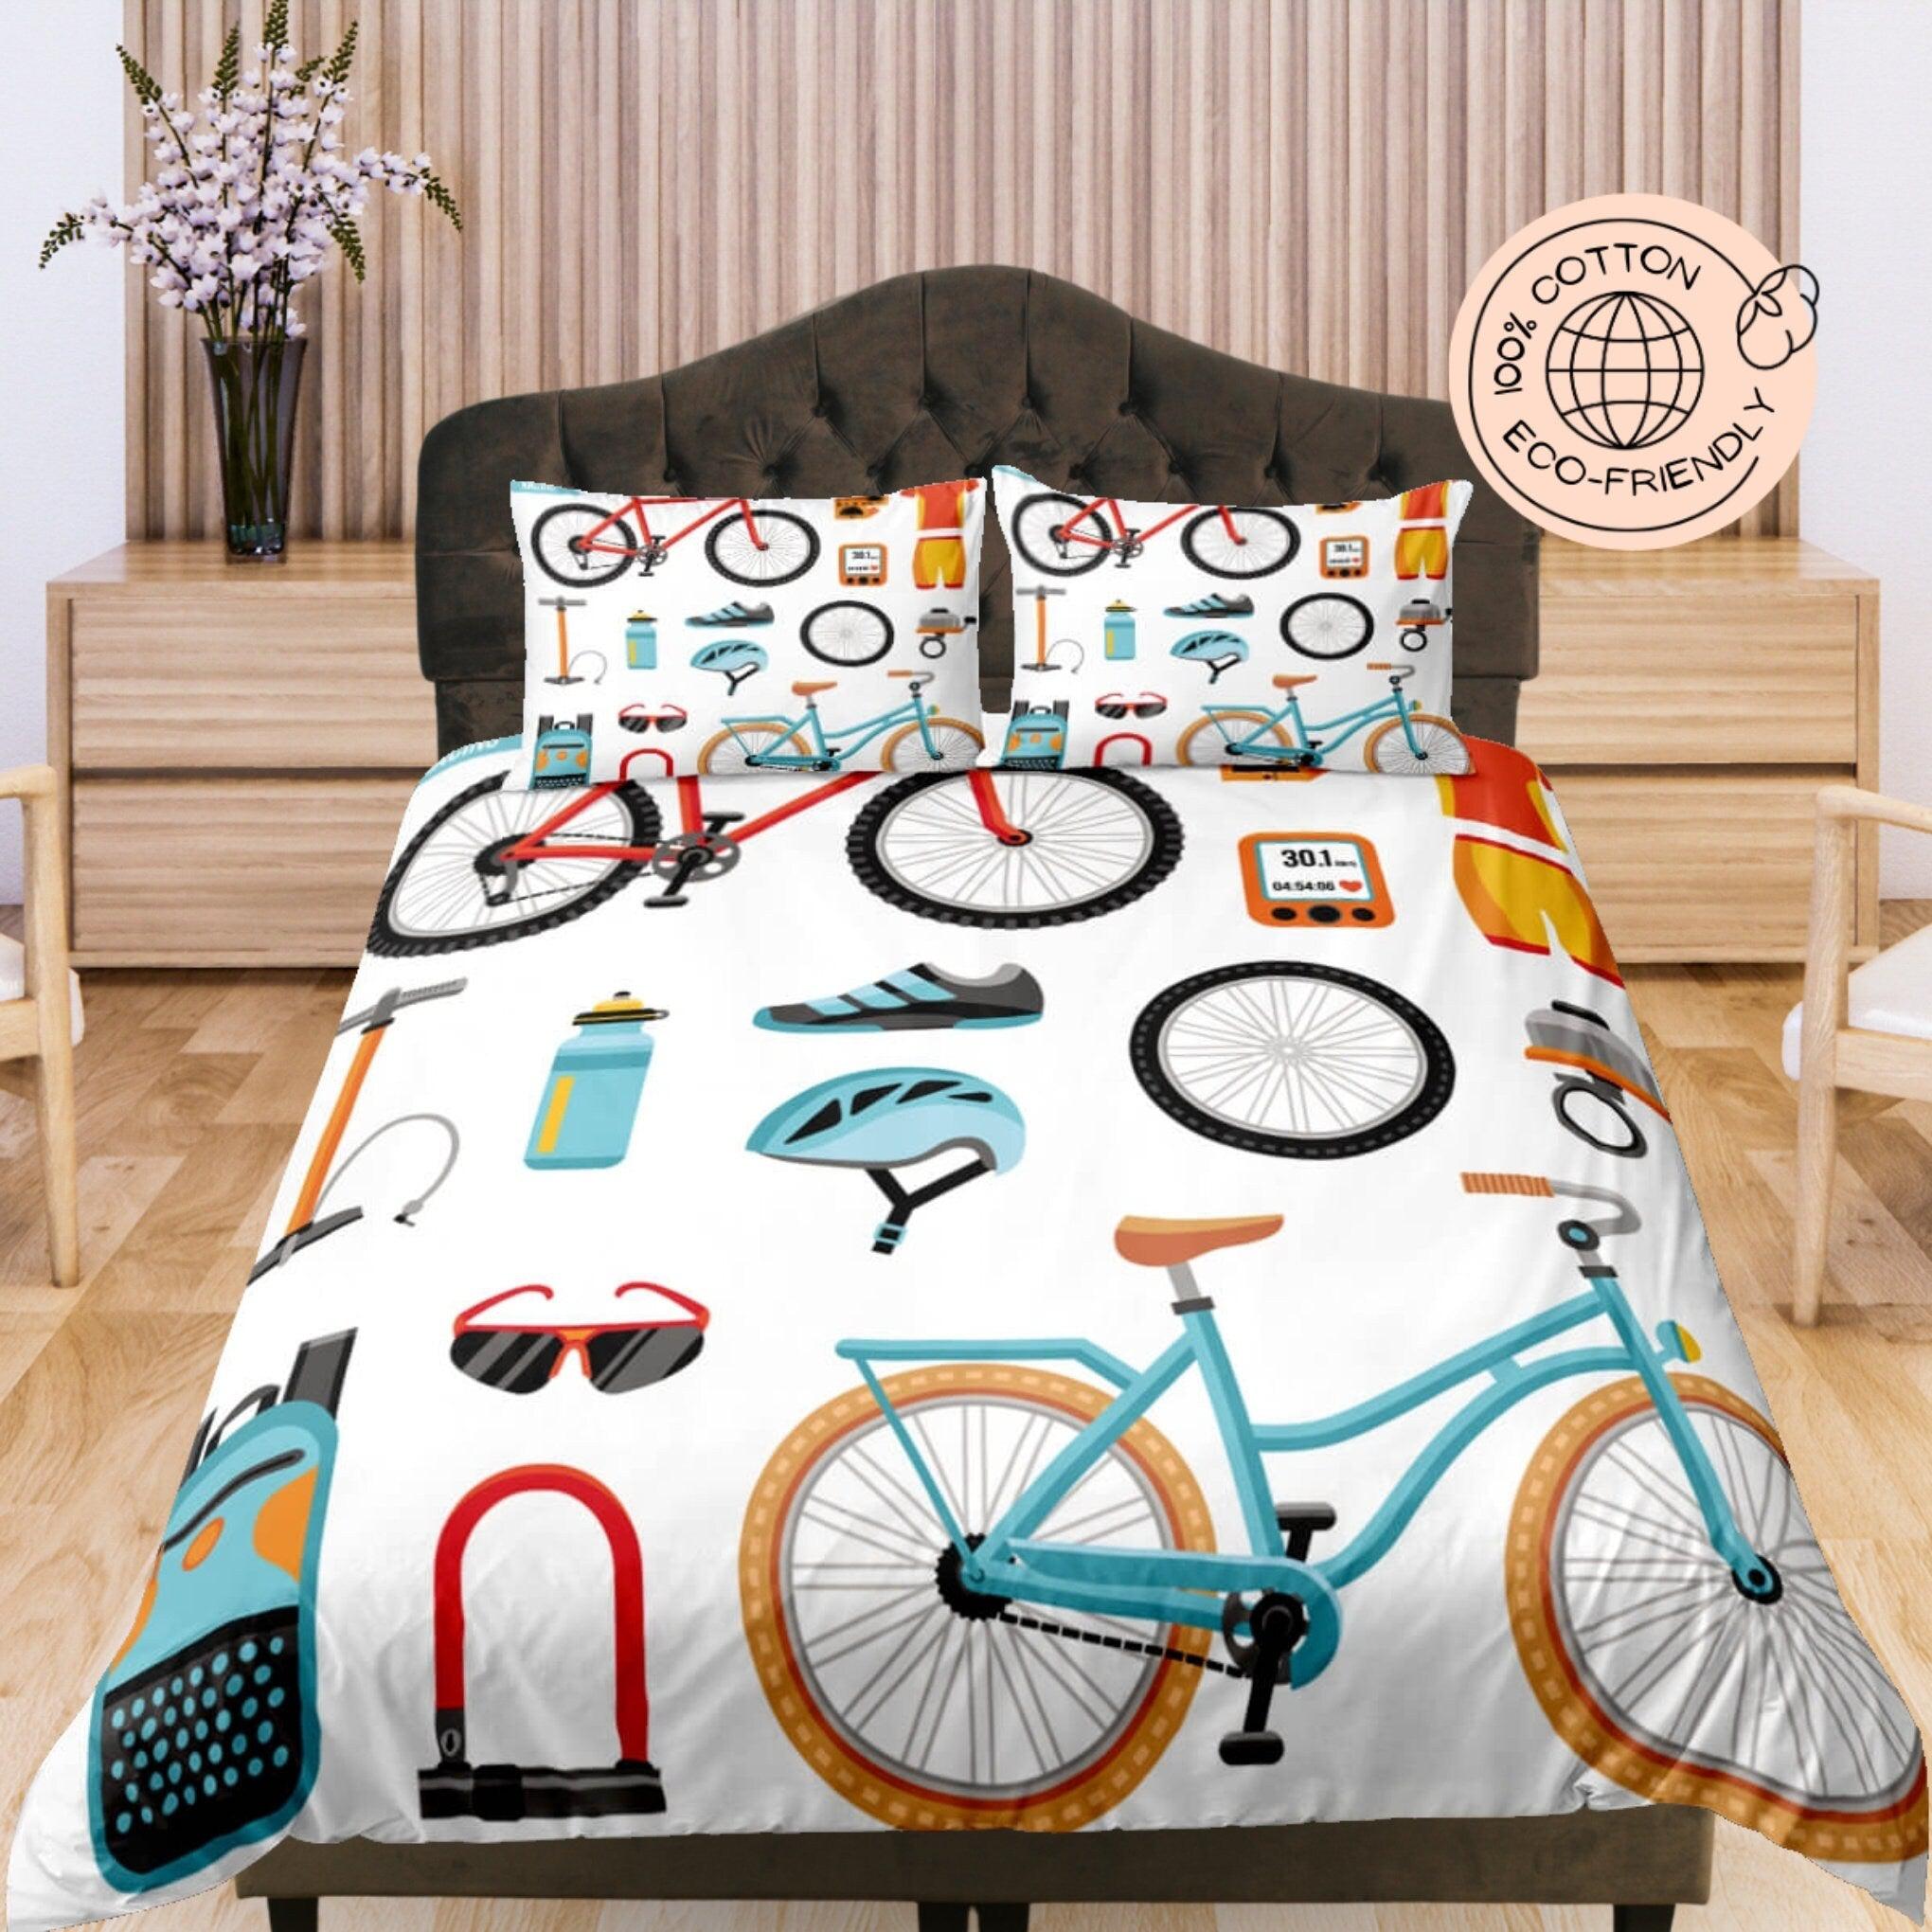 daintyduvet Road Cycling Themed Cotton Duvet Cover Set for Kids, Toddler Bedding, Baby Zipper Bedding, Nursery Bedding, Gift for Bikers, Cyclist